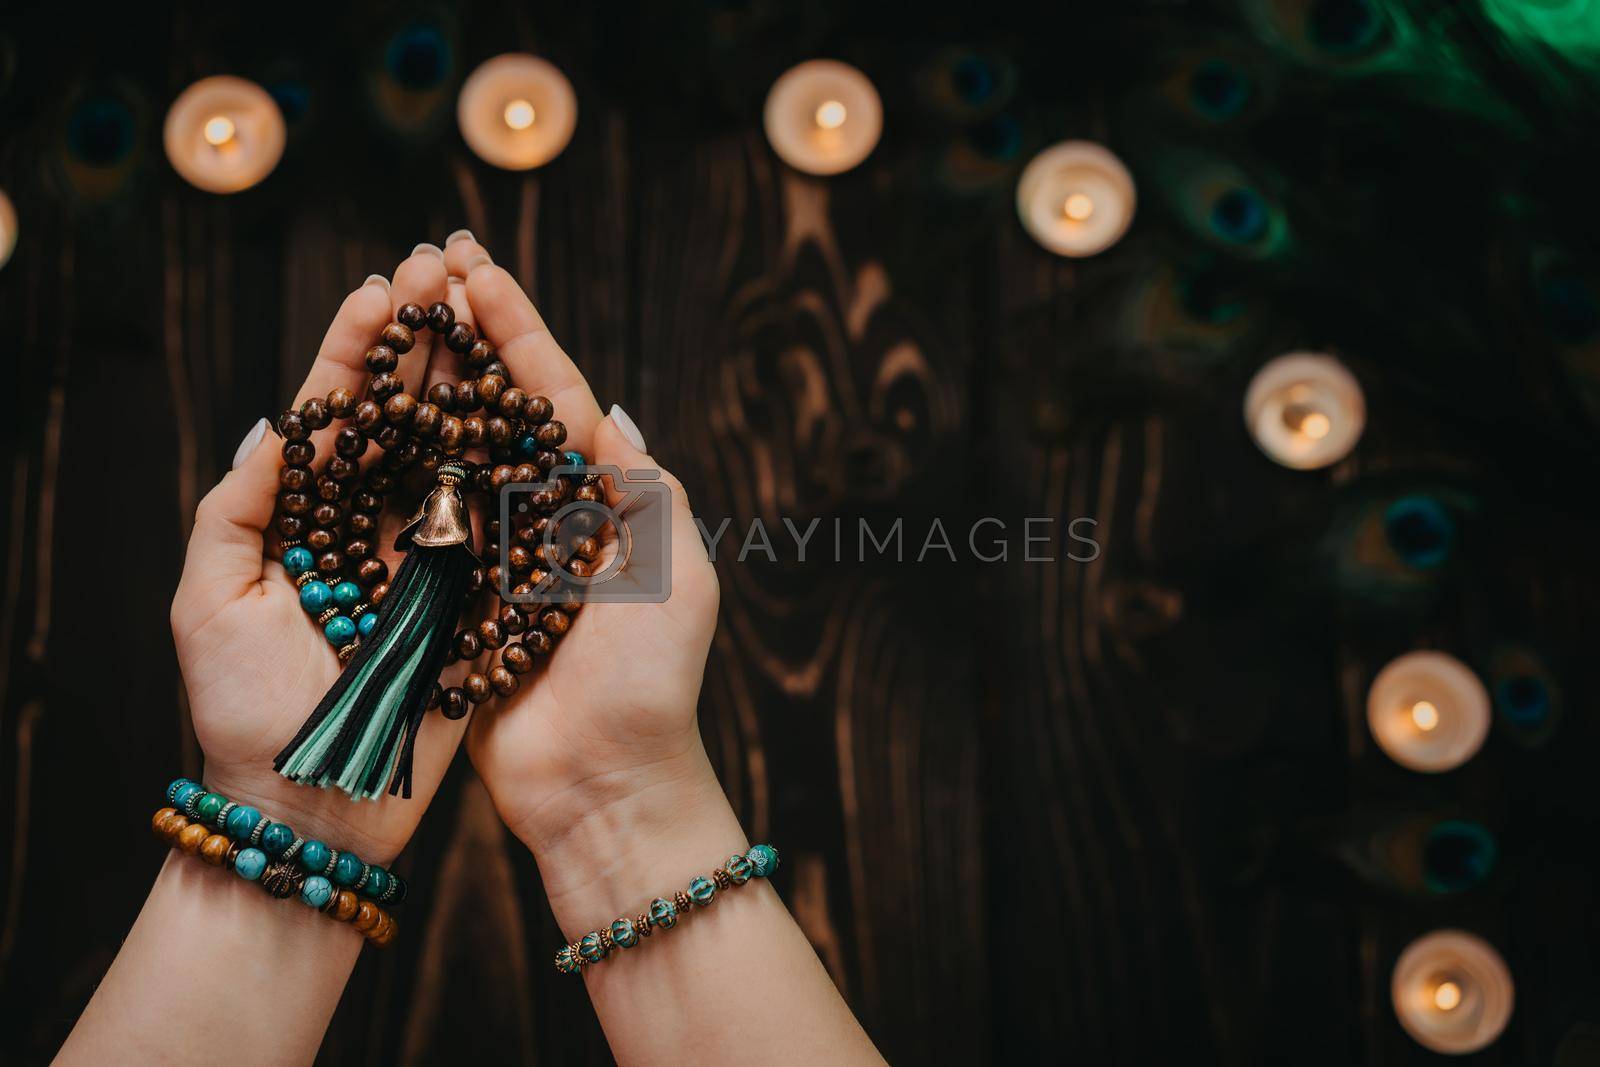 Royalty free image of Woman holds in hand wooden mala beads strands used for keeping count during mantra meditations. Weaving and creation. Wooden background with candles and feathers. Spirituality, religion, God concept. by kristina_kokhanova